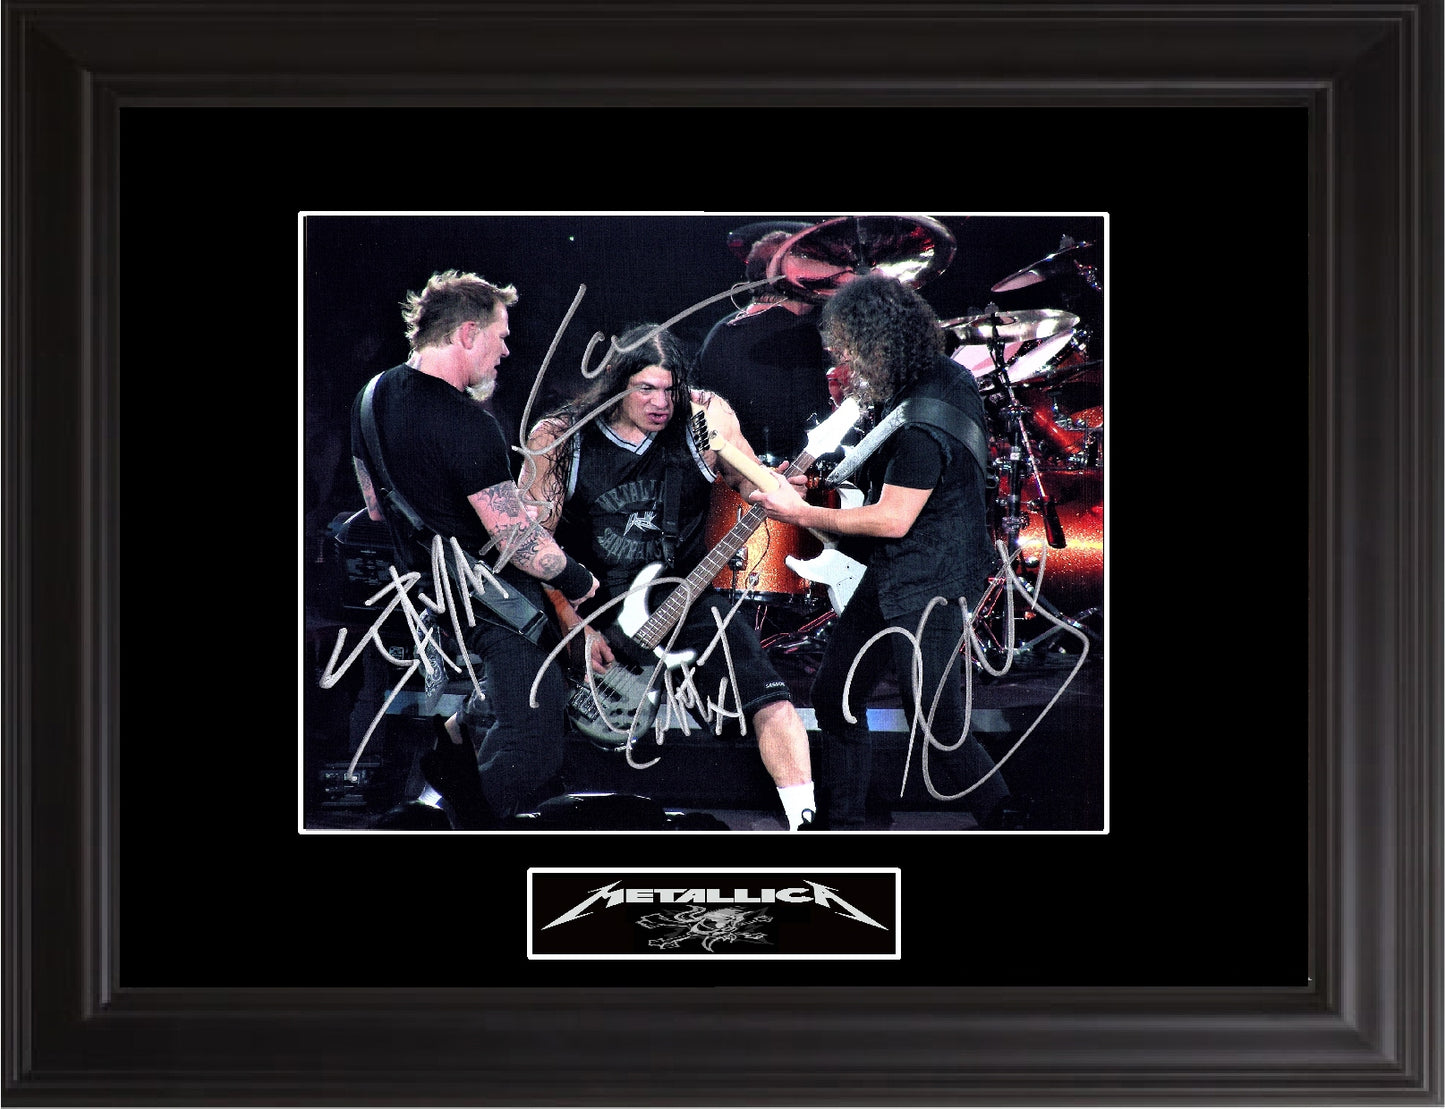 Metallica Autographed Photo - Zion Graphic Collectibles